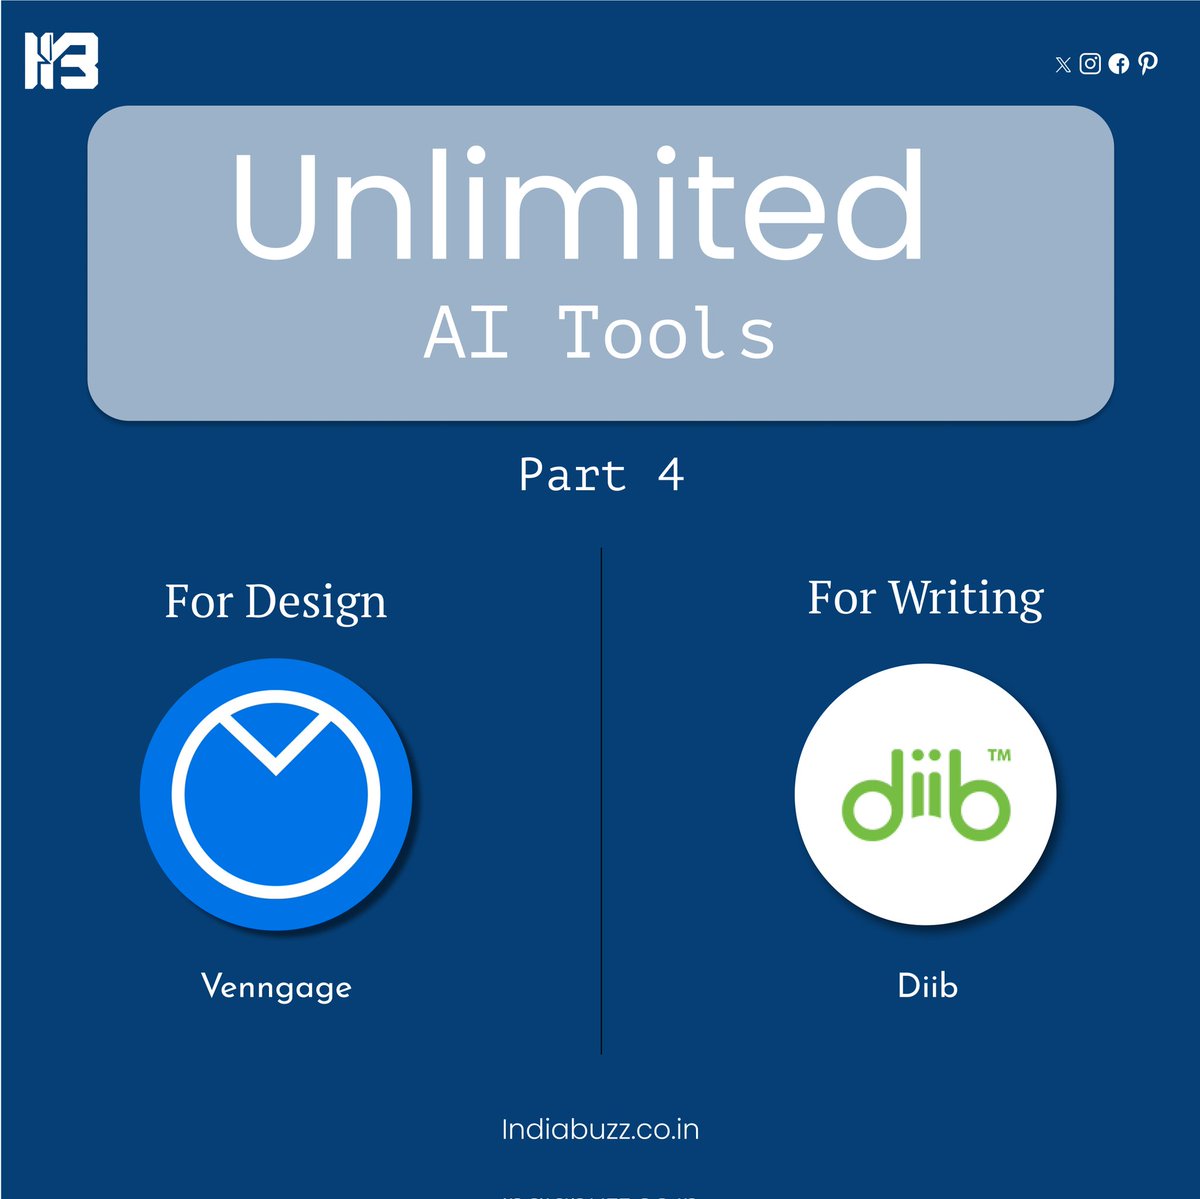 Unlimited AI Tools For Design & Writing.
.
.
#ibuzztechsolution #DesigningTheFuture #ToolsOfSuccess #explorepage